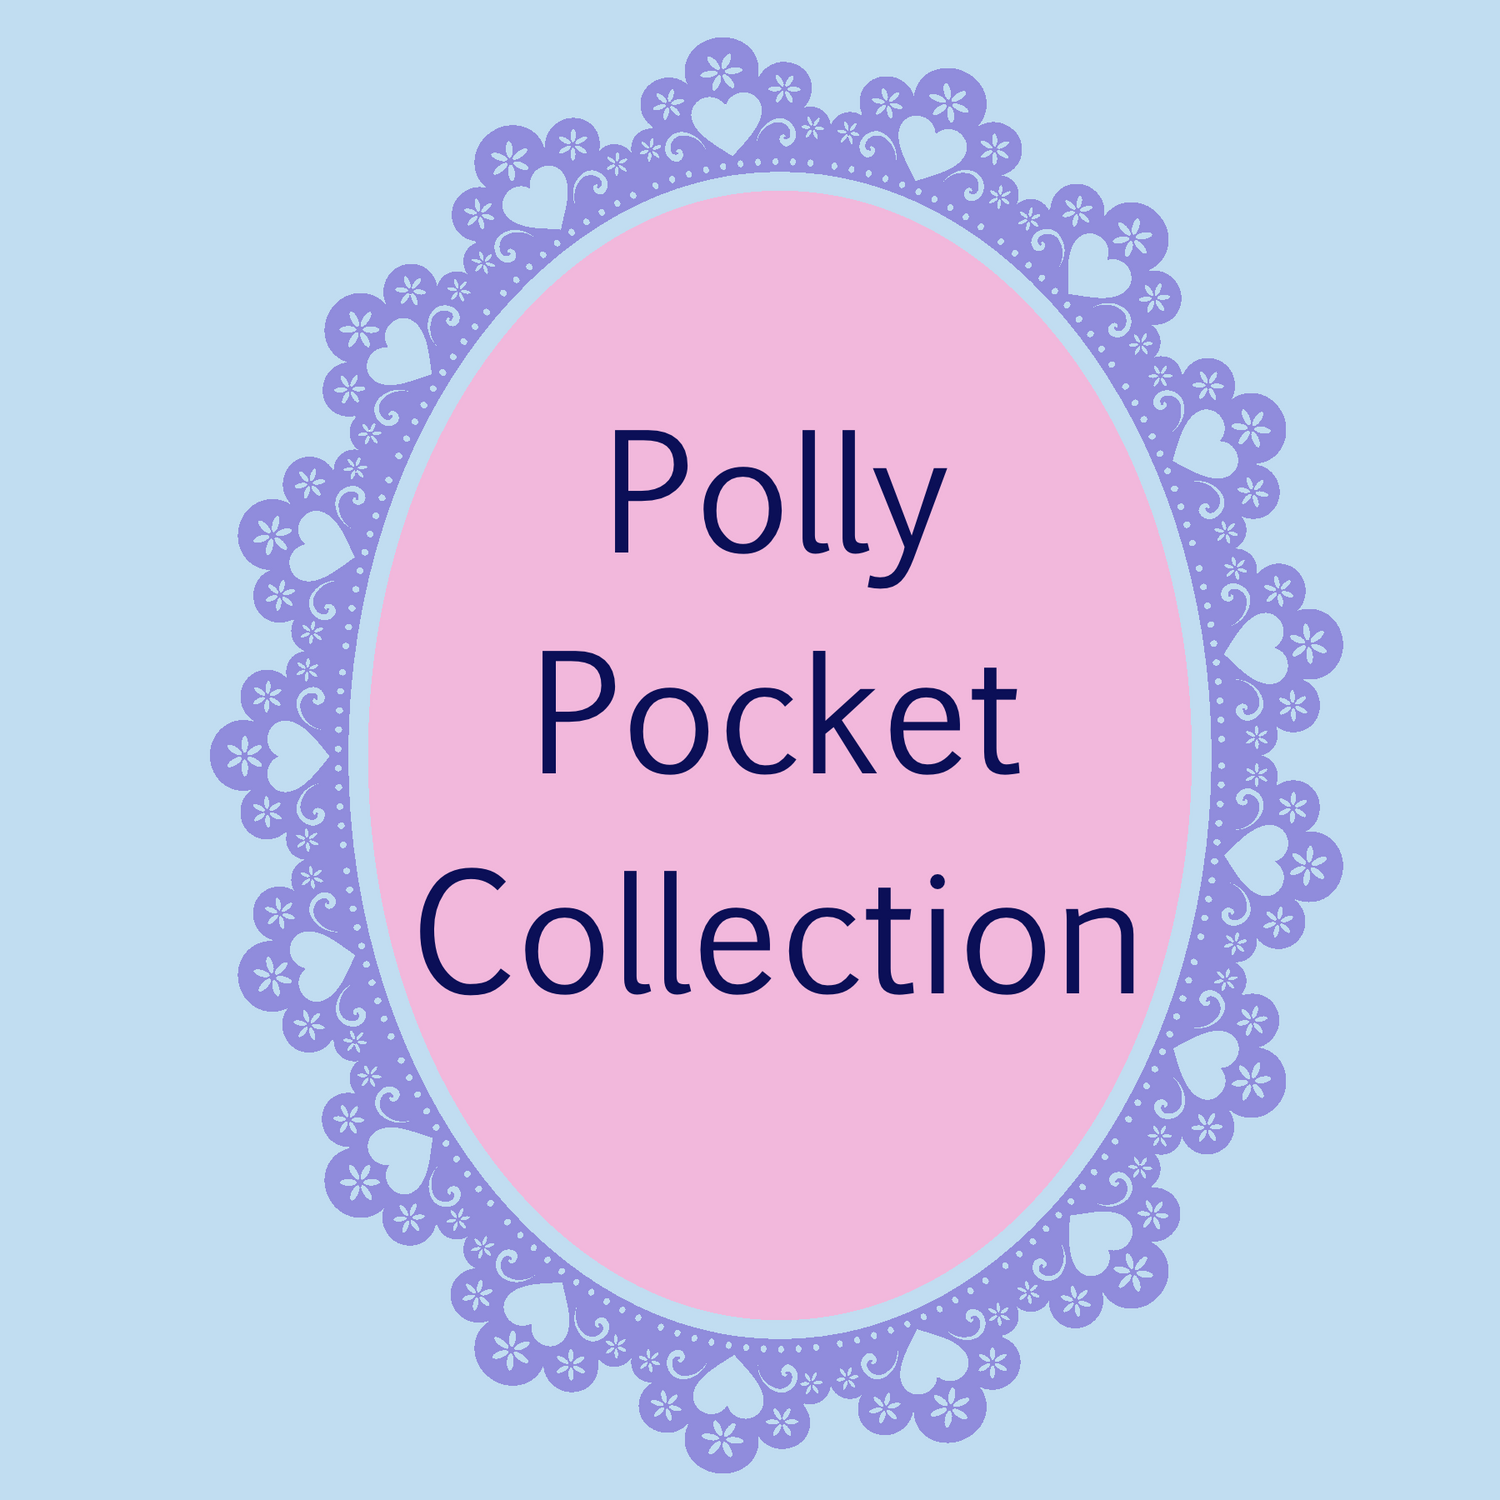 Polly Pocket Collection